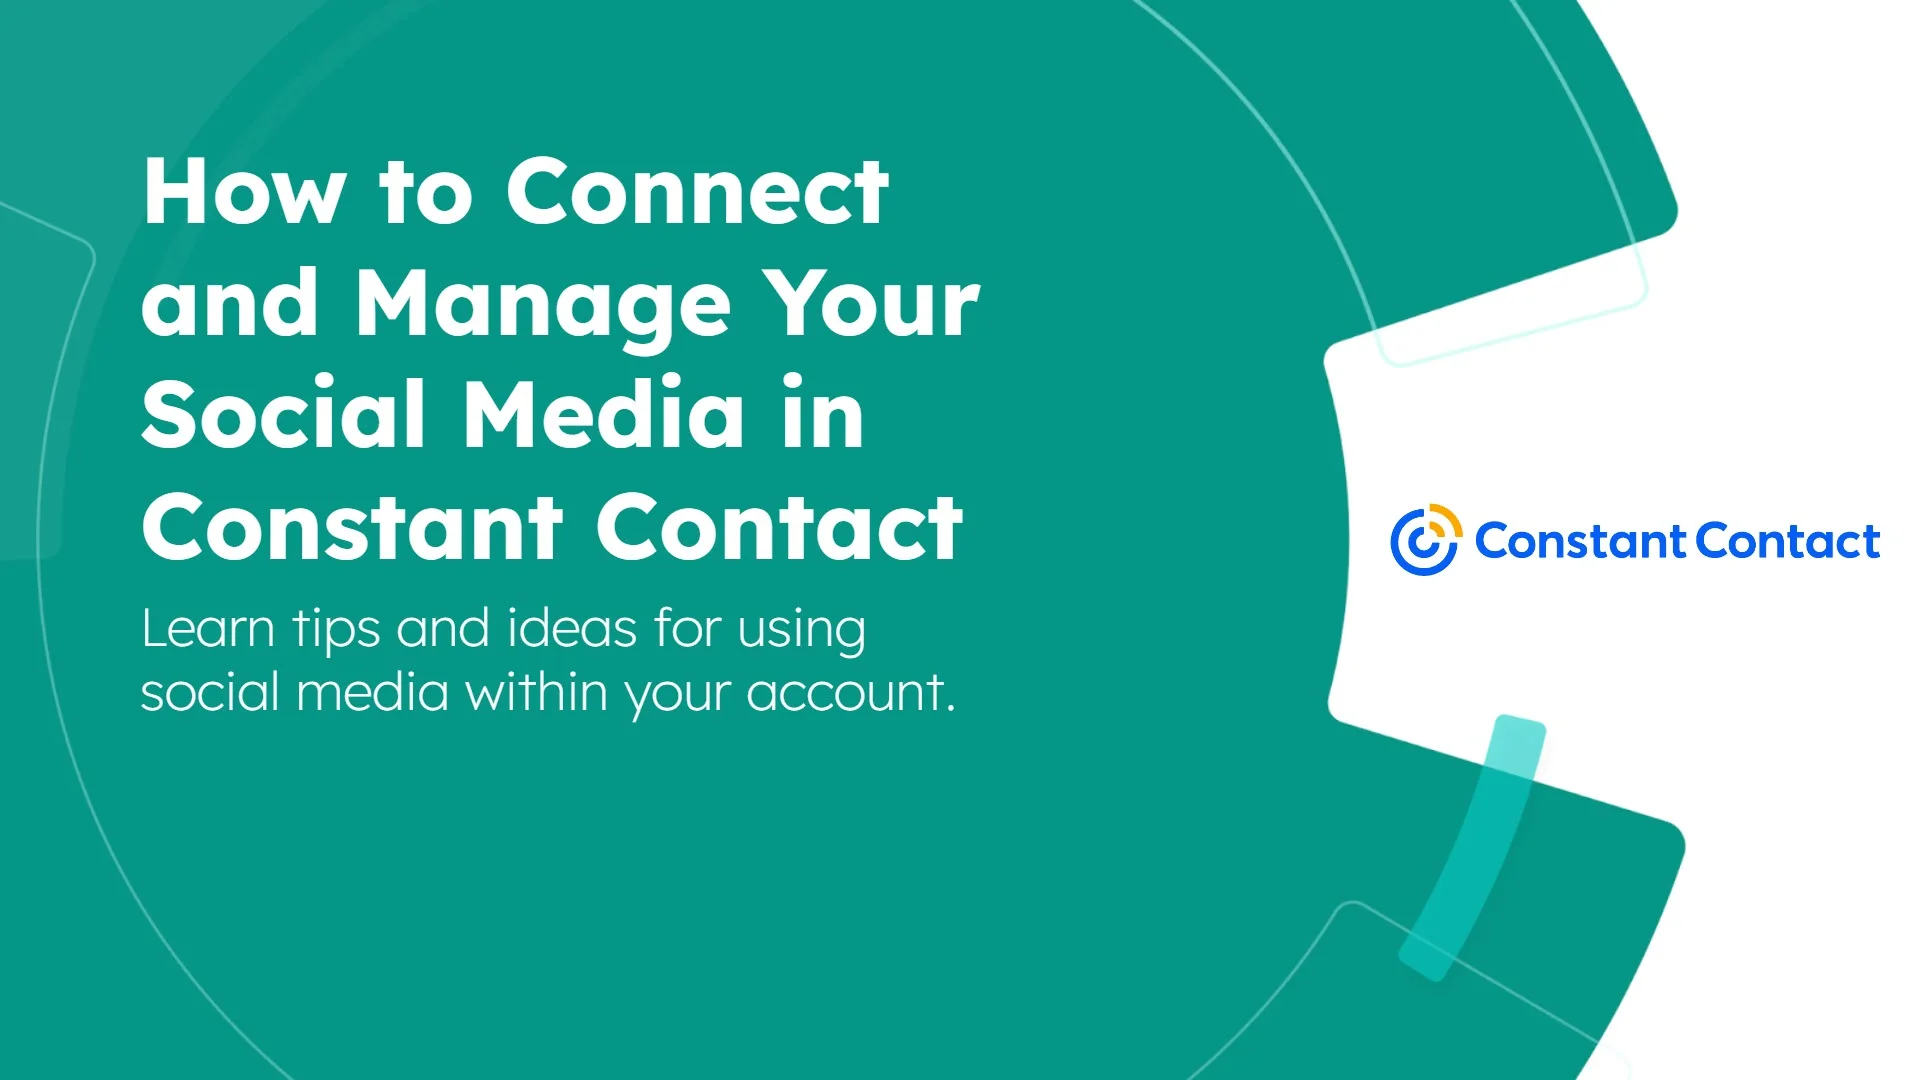 Use an email to grow your contact list